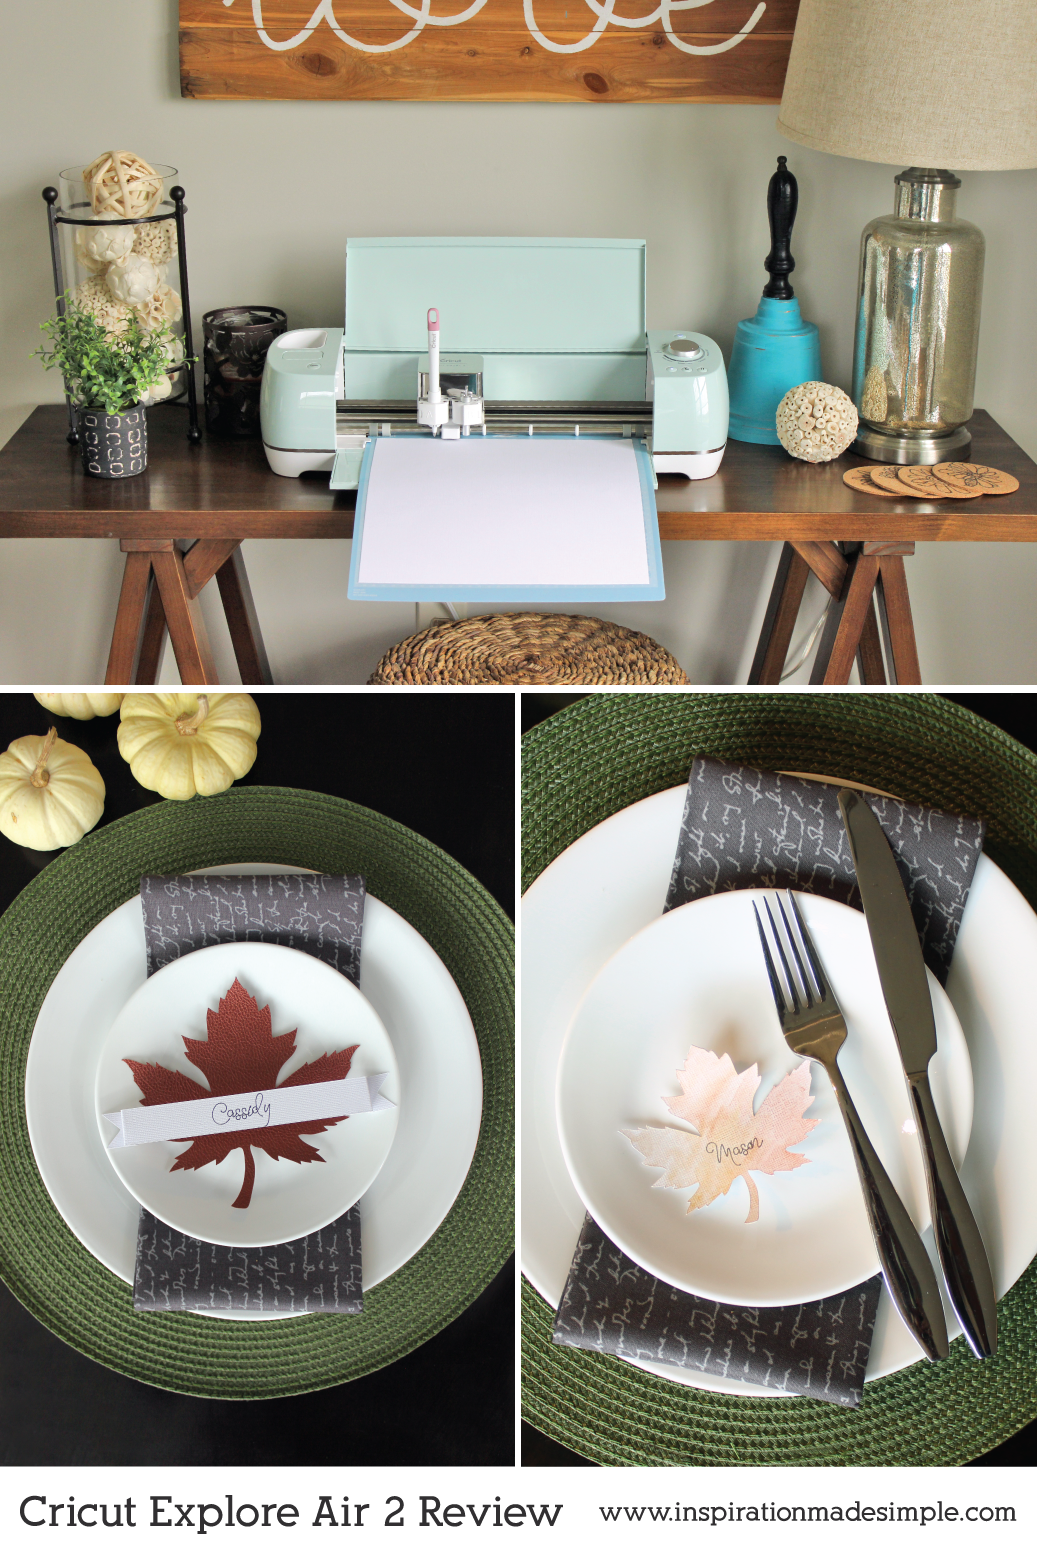 Simple DIY Leather Leaf Place Setting Card